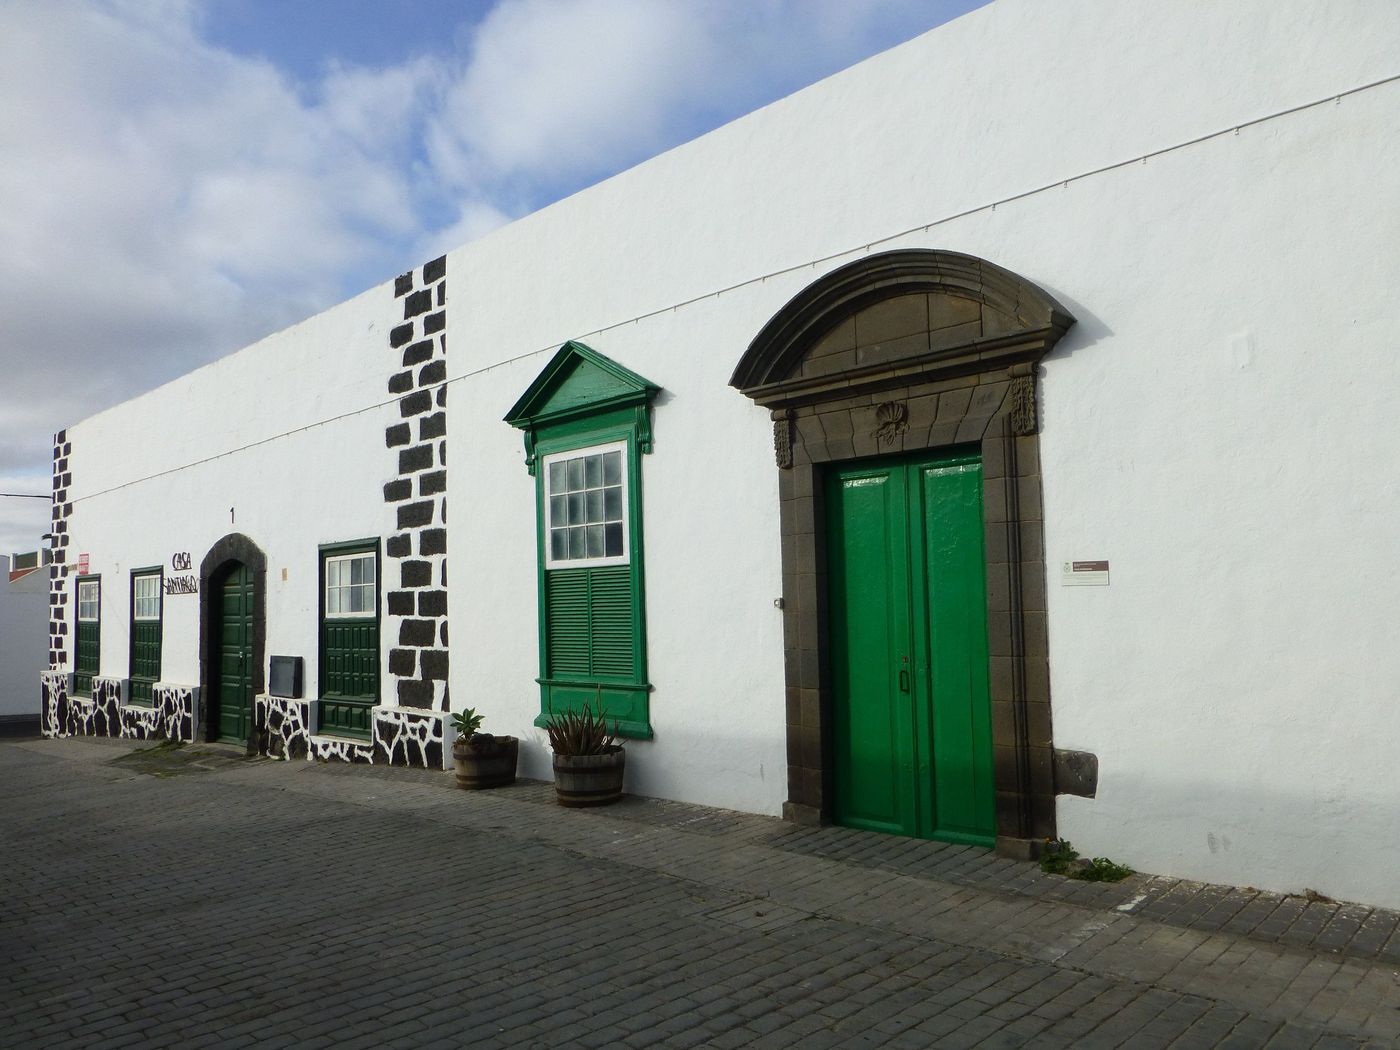 Teguise